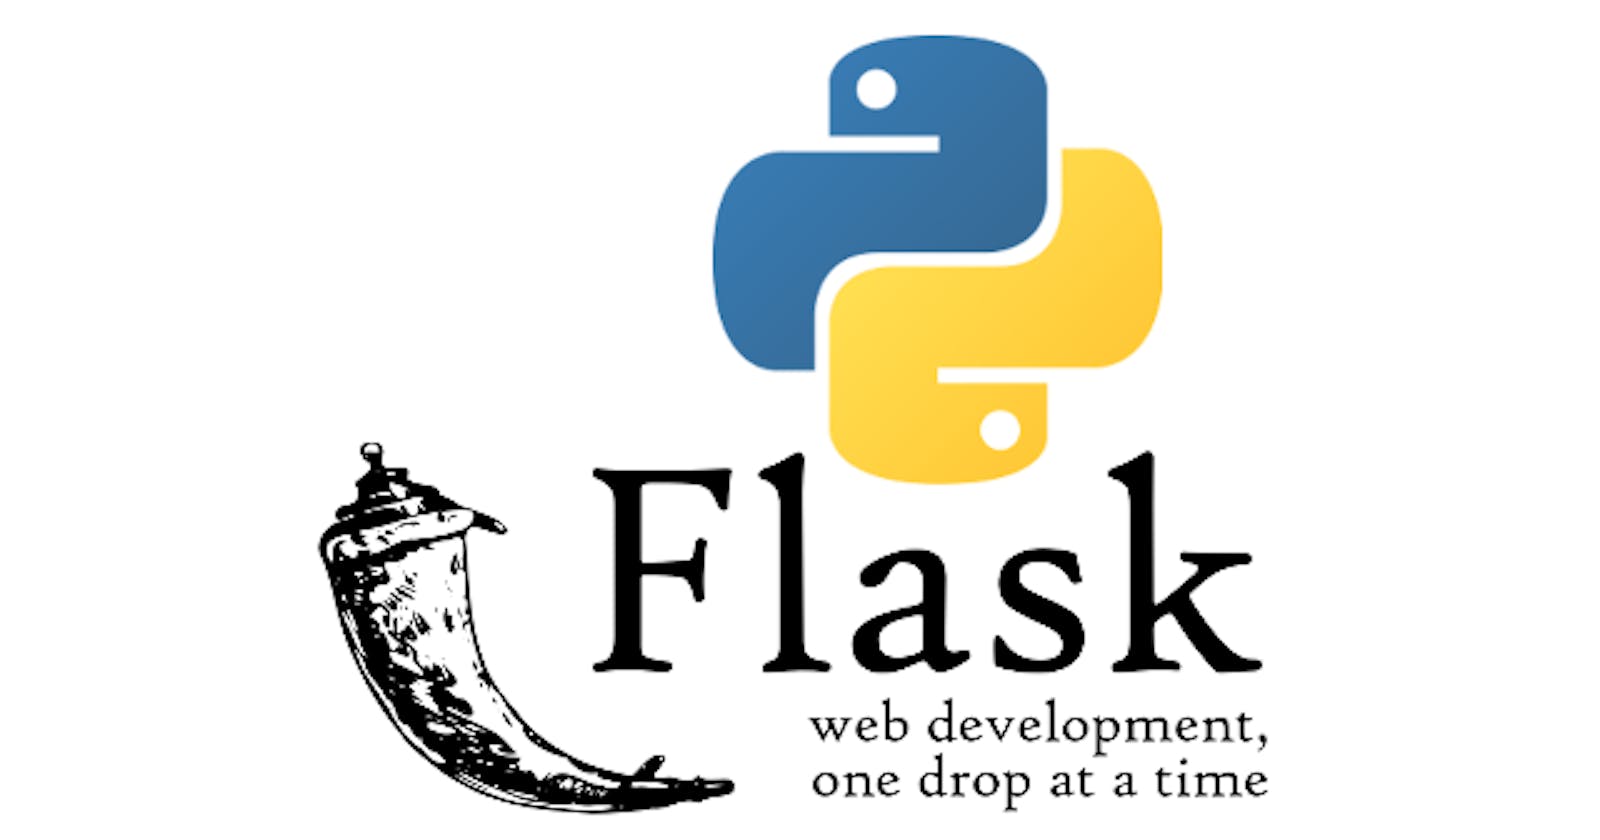 Start using Flask(Python) in 2 simple steps.